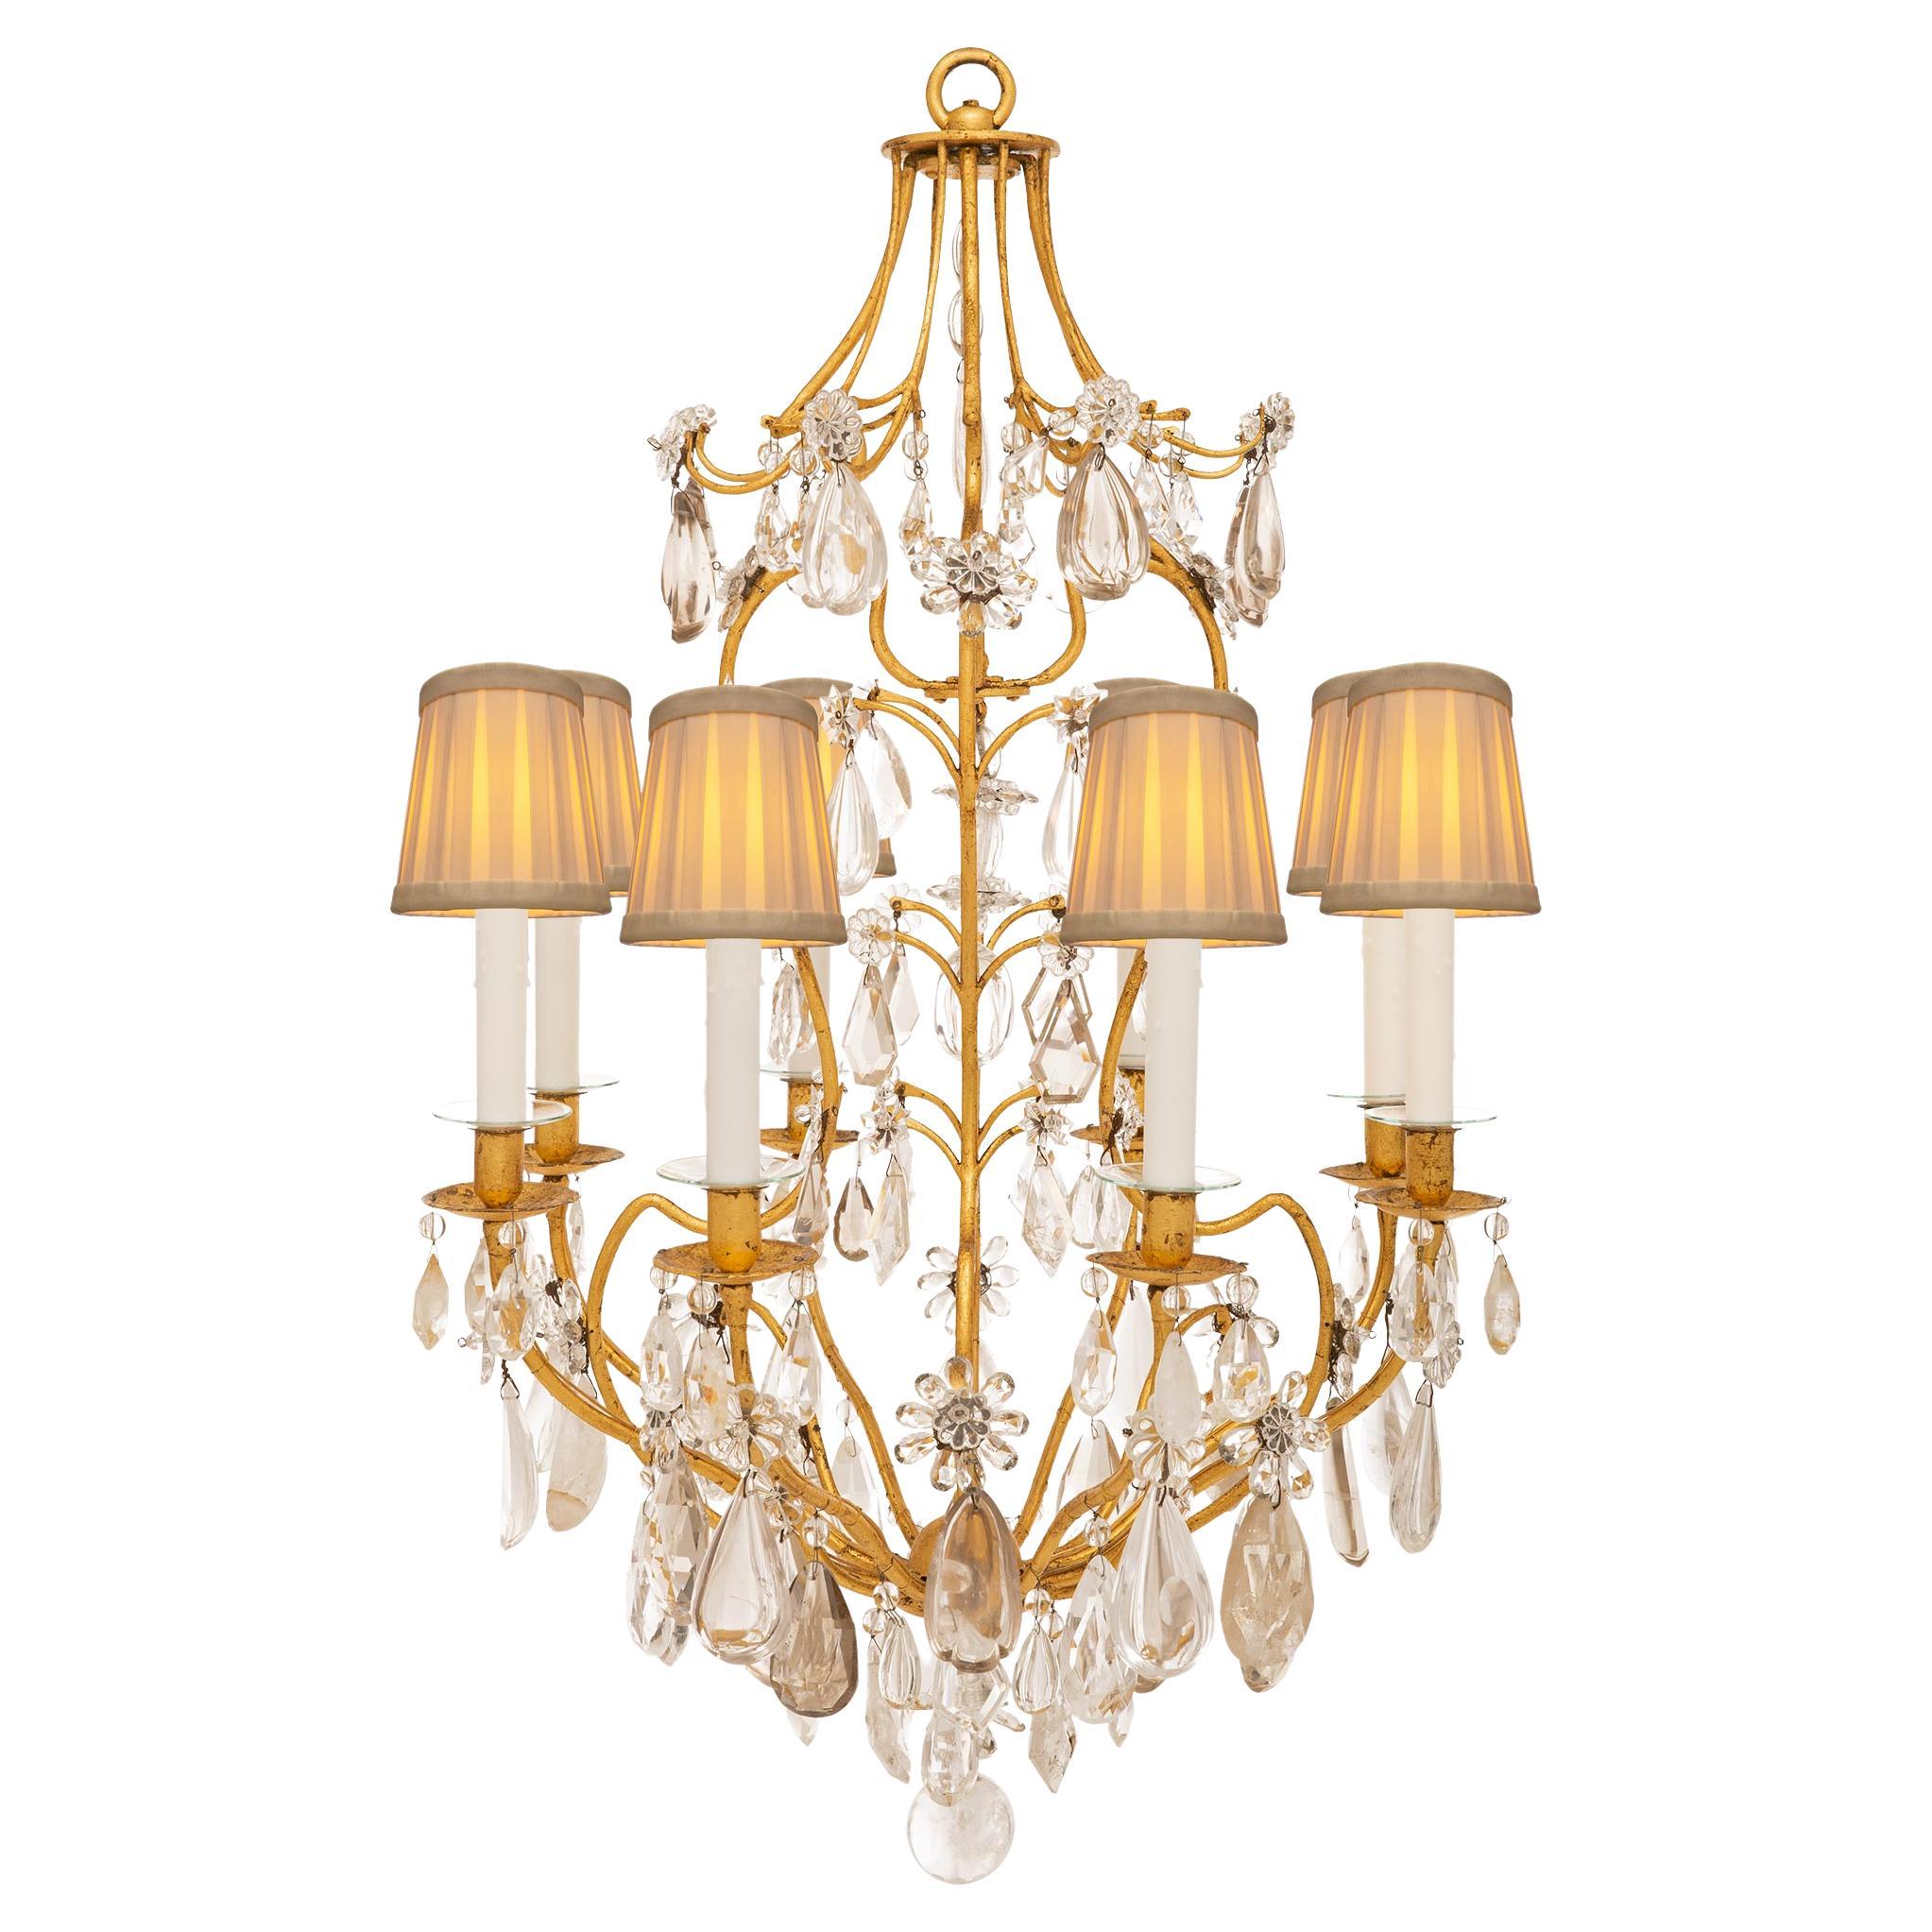 A French 19th century Gilt Iron, crystal and rock crystal chandelier